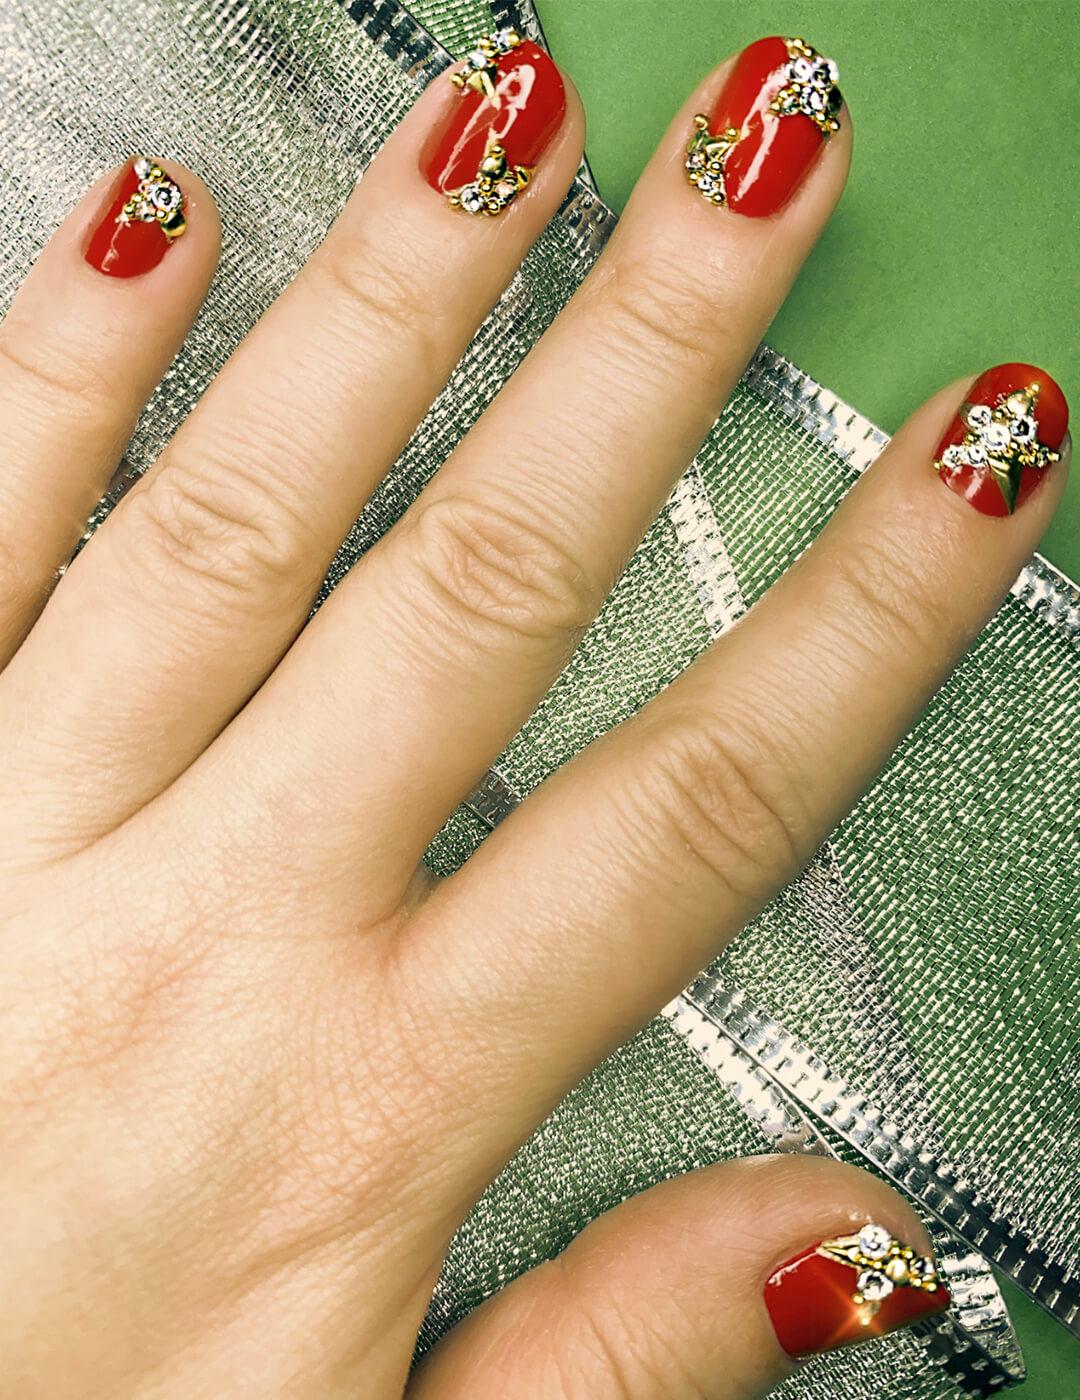 Close-up image of a model's hand with red mani embellished with rhinestones and studs against a green background with silver lace ribbons